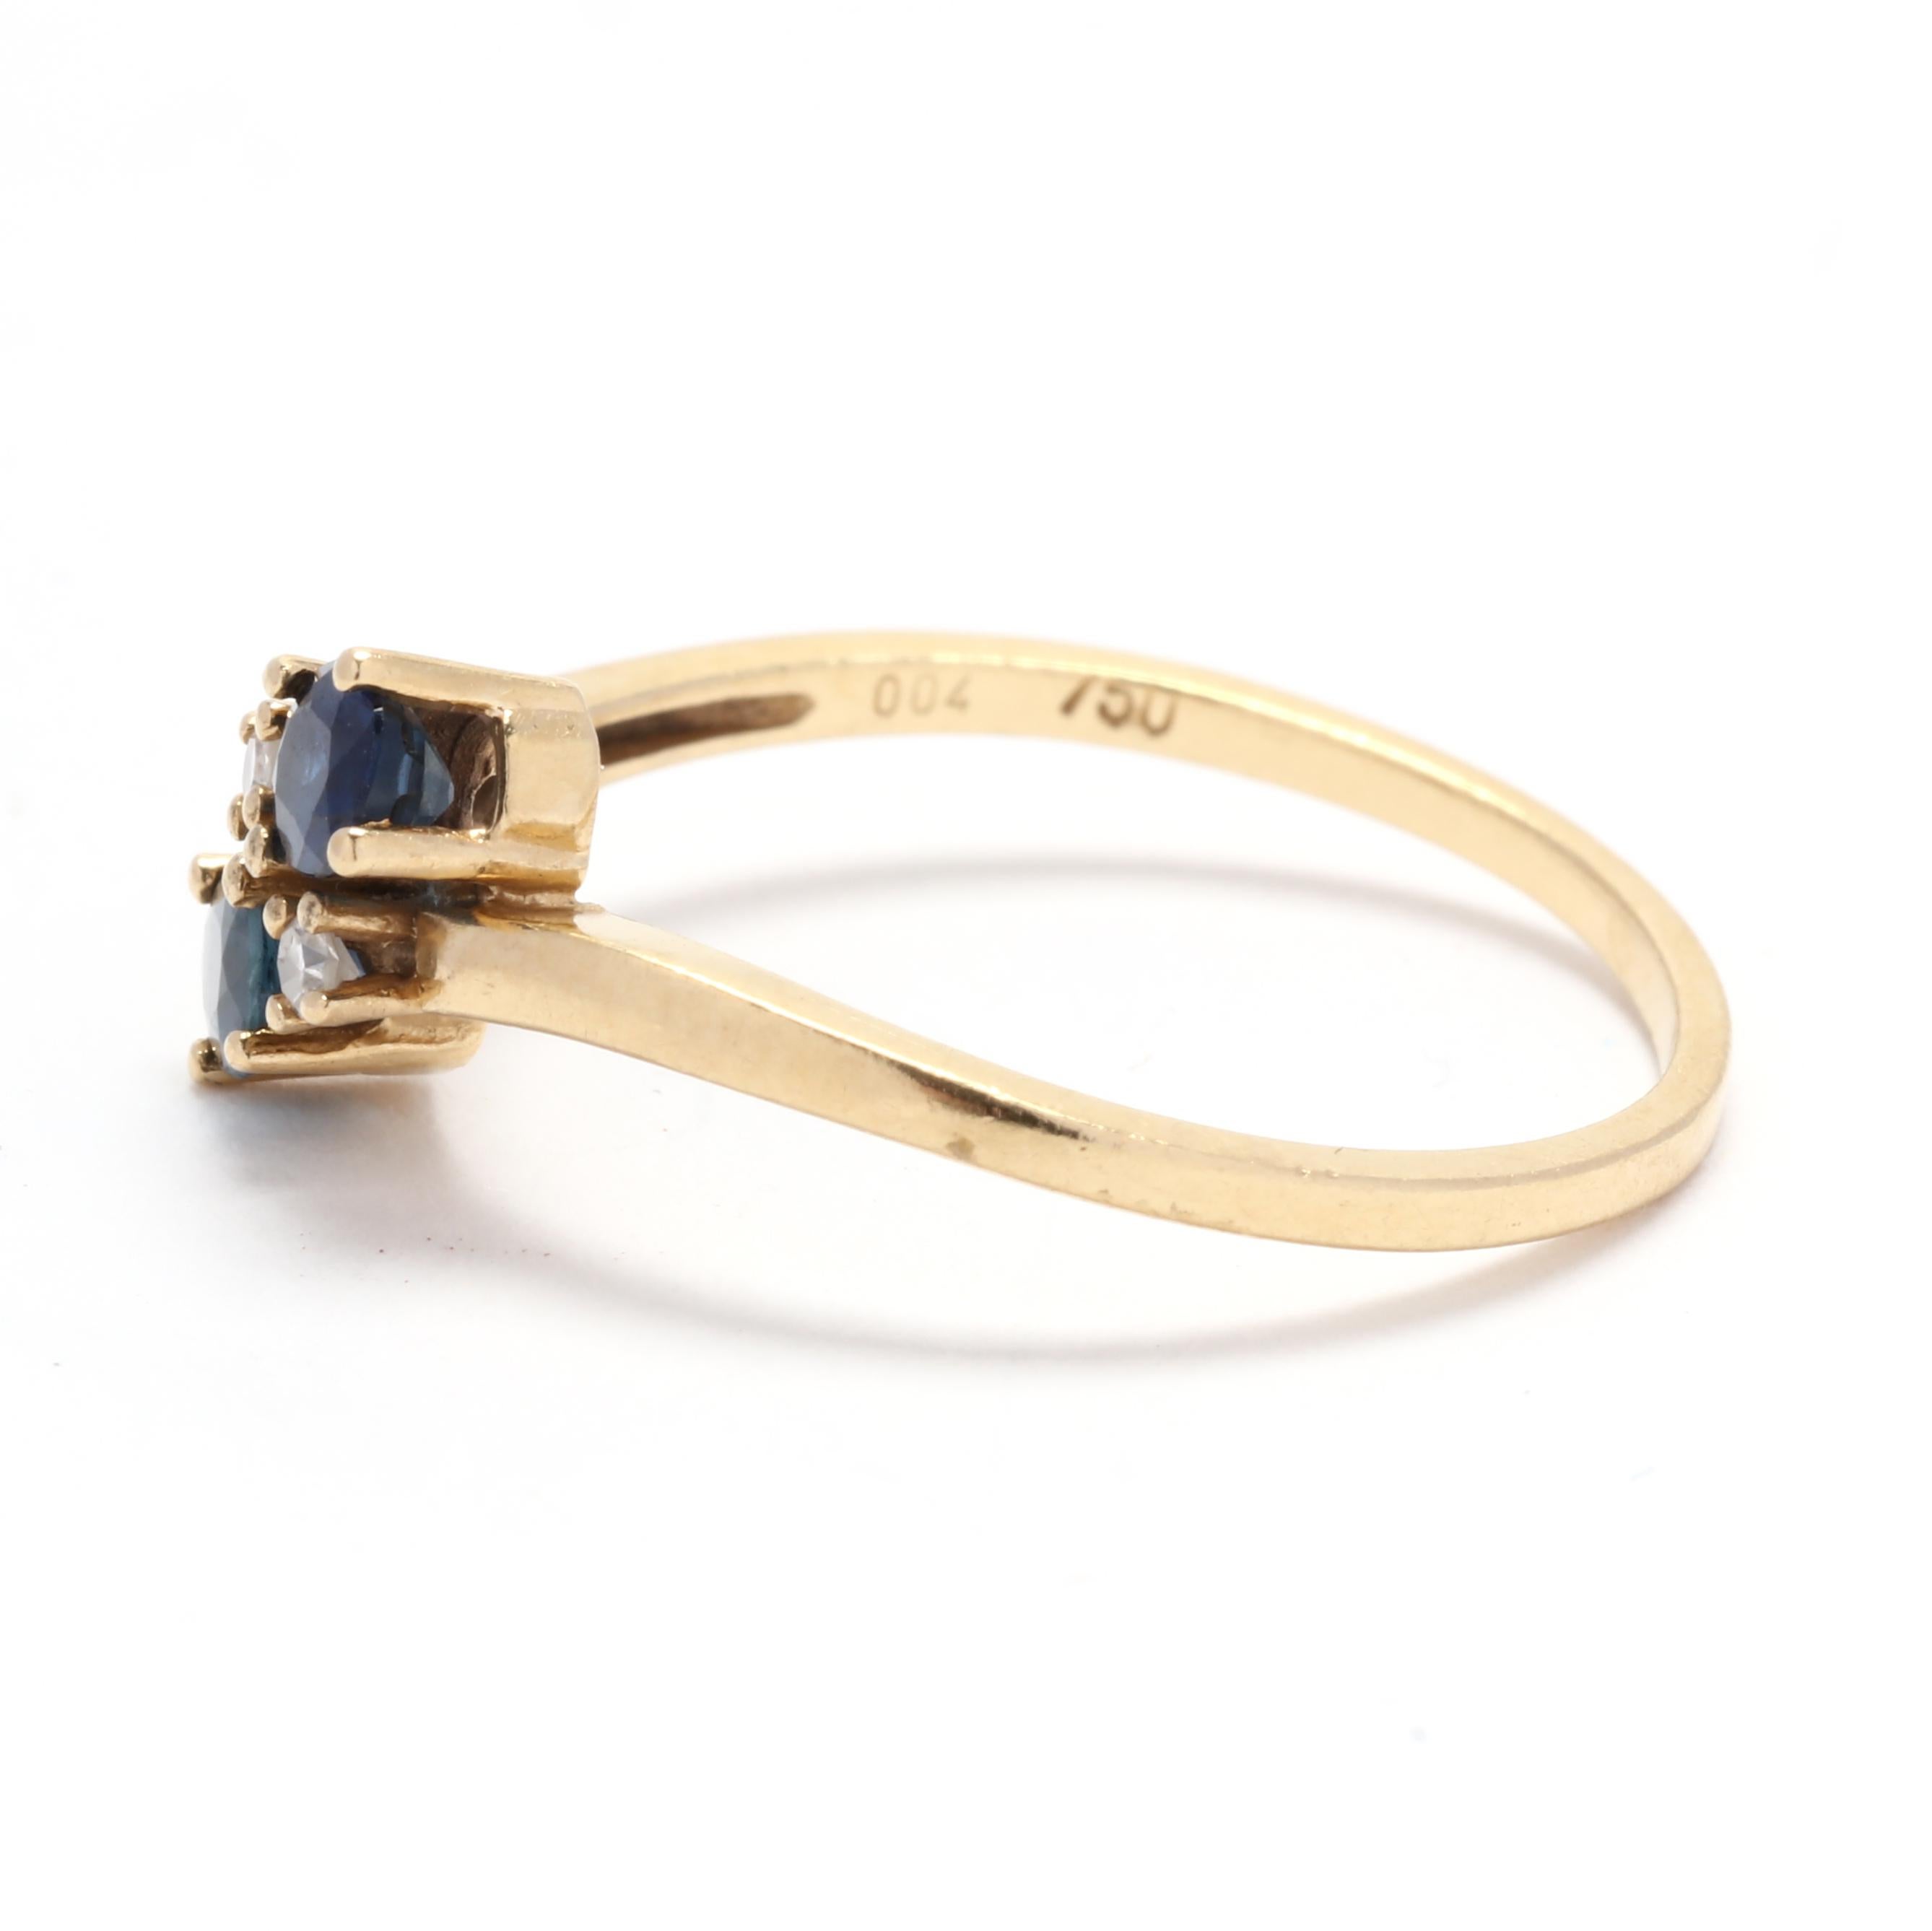 0.54ctw Sapphire Diamond Toi et Moi Ring, 18K Yellow Gold, Ring Size 6.5, Simple In Good Condition For Sale In McLeansville, NC